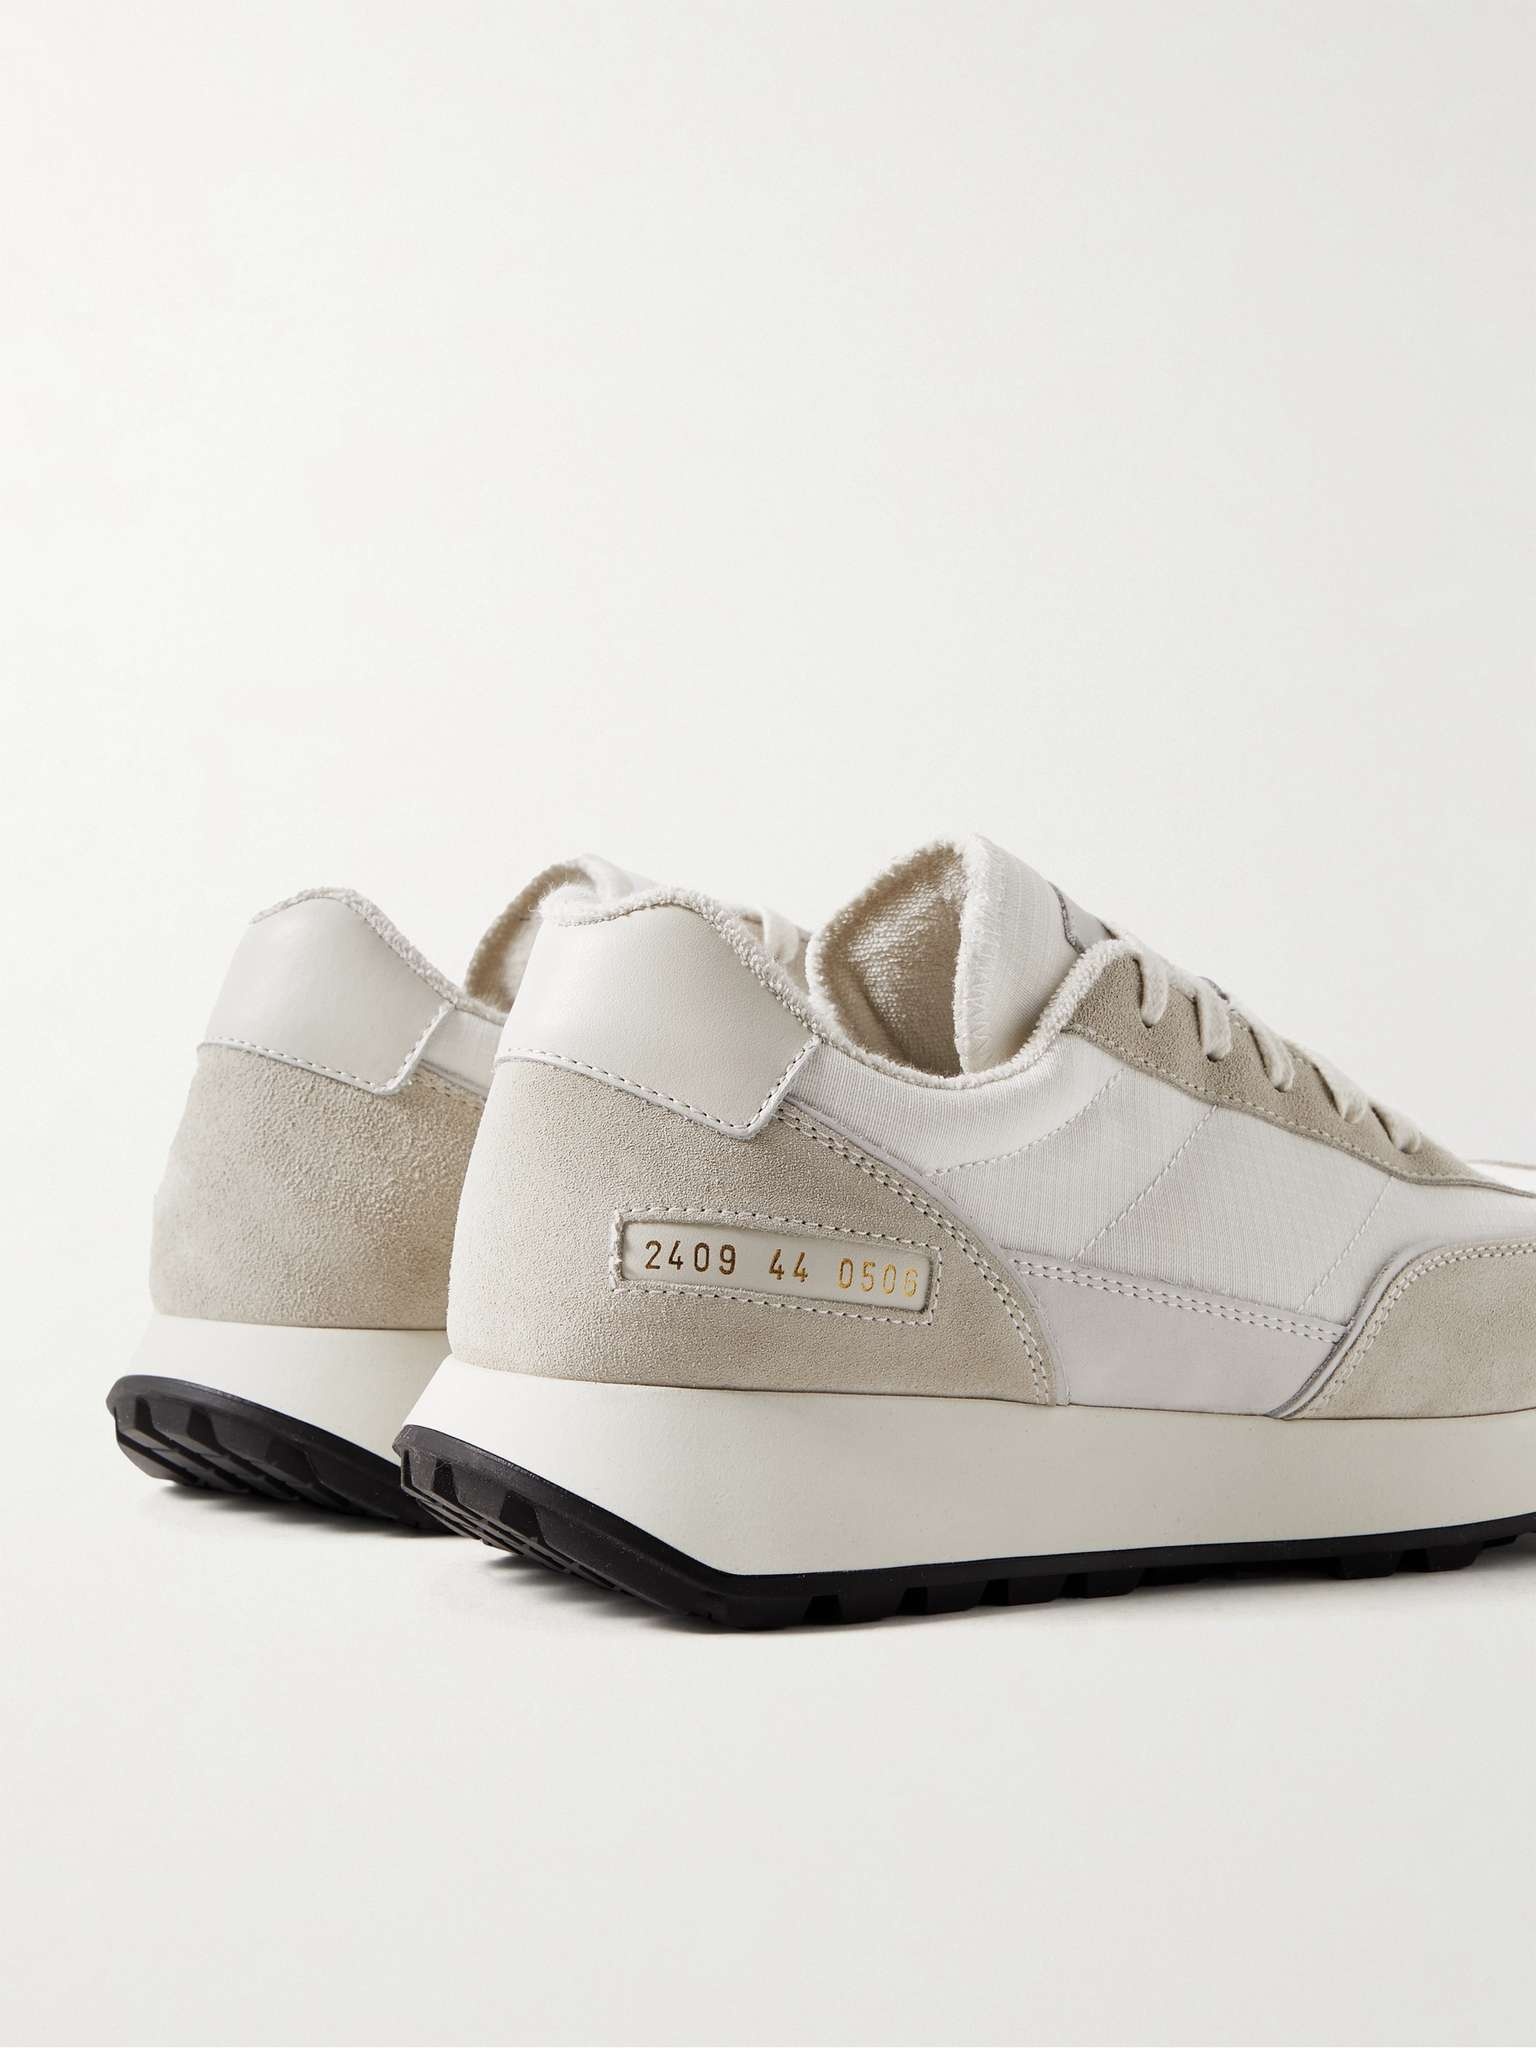 Track Classic Leather and Suede-Trimmed Ripstop Sneakers - 5